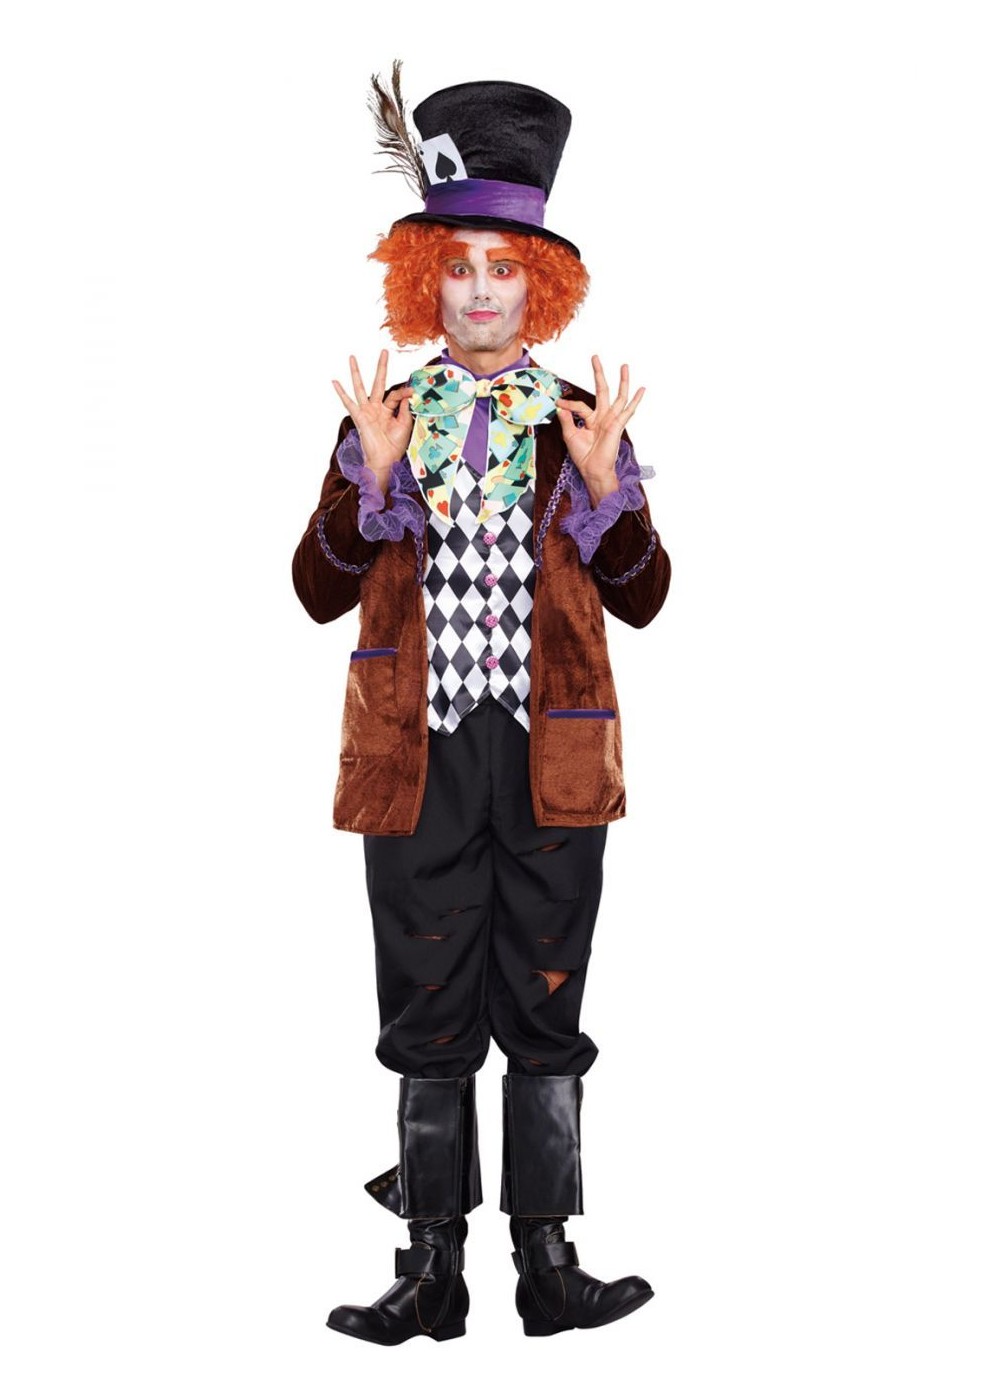 Hatter Madness Mens Costume